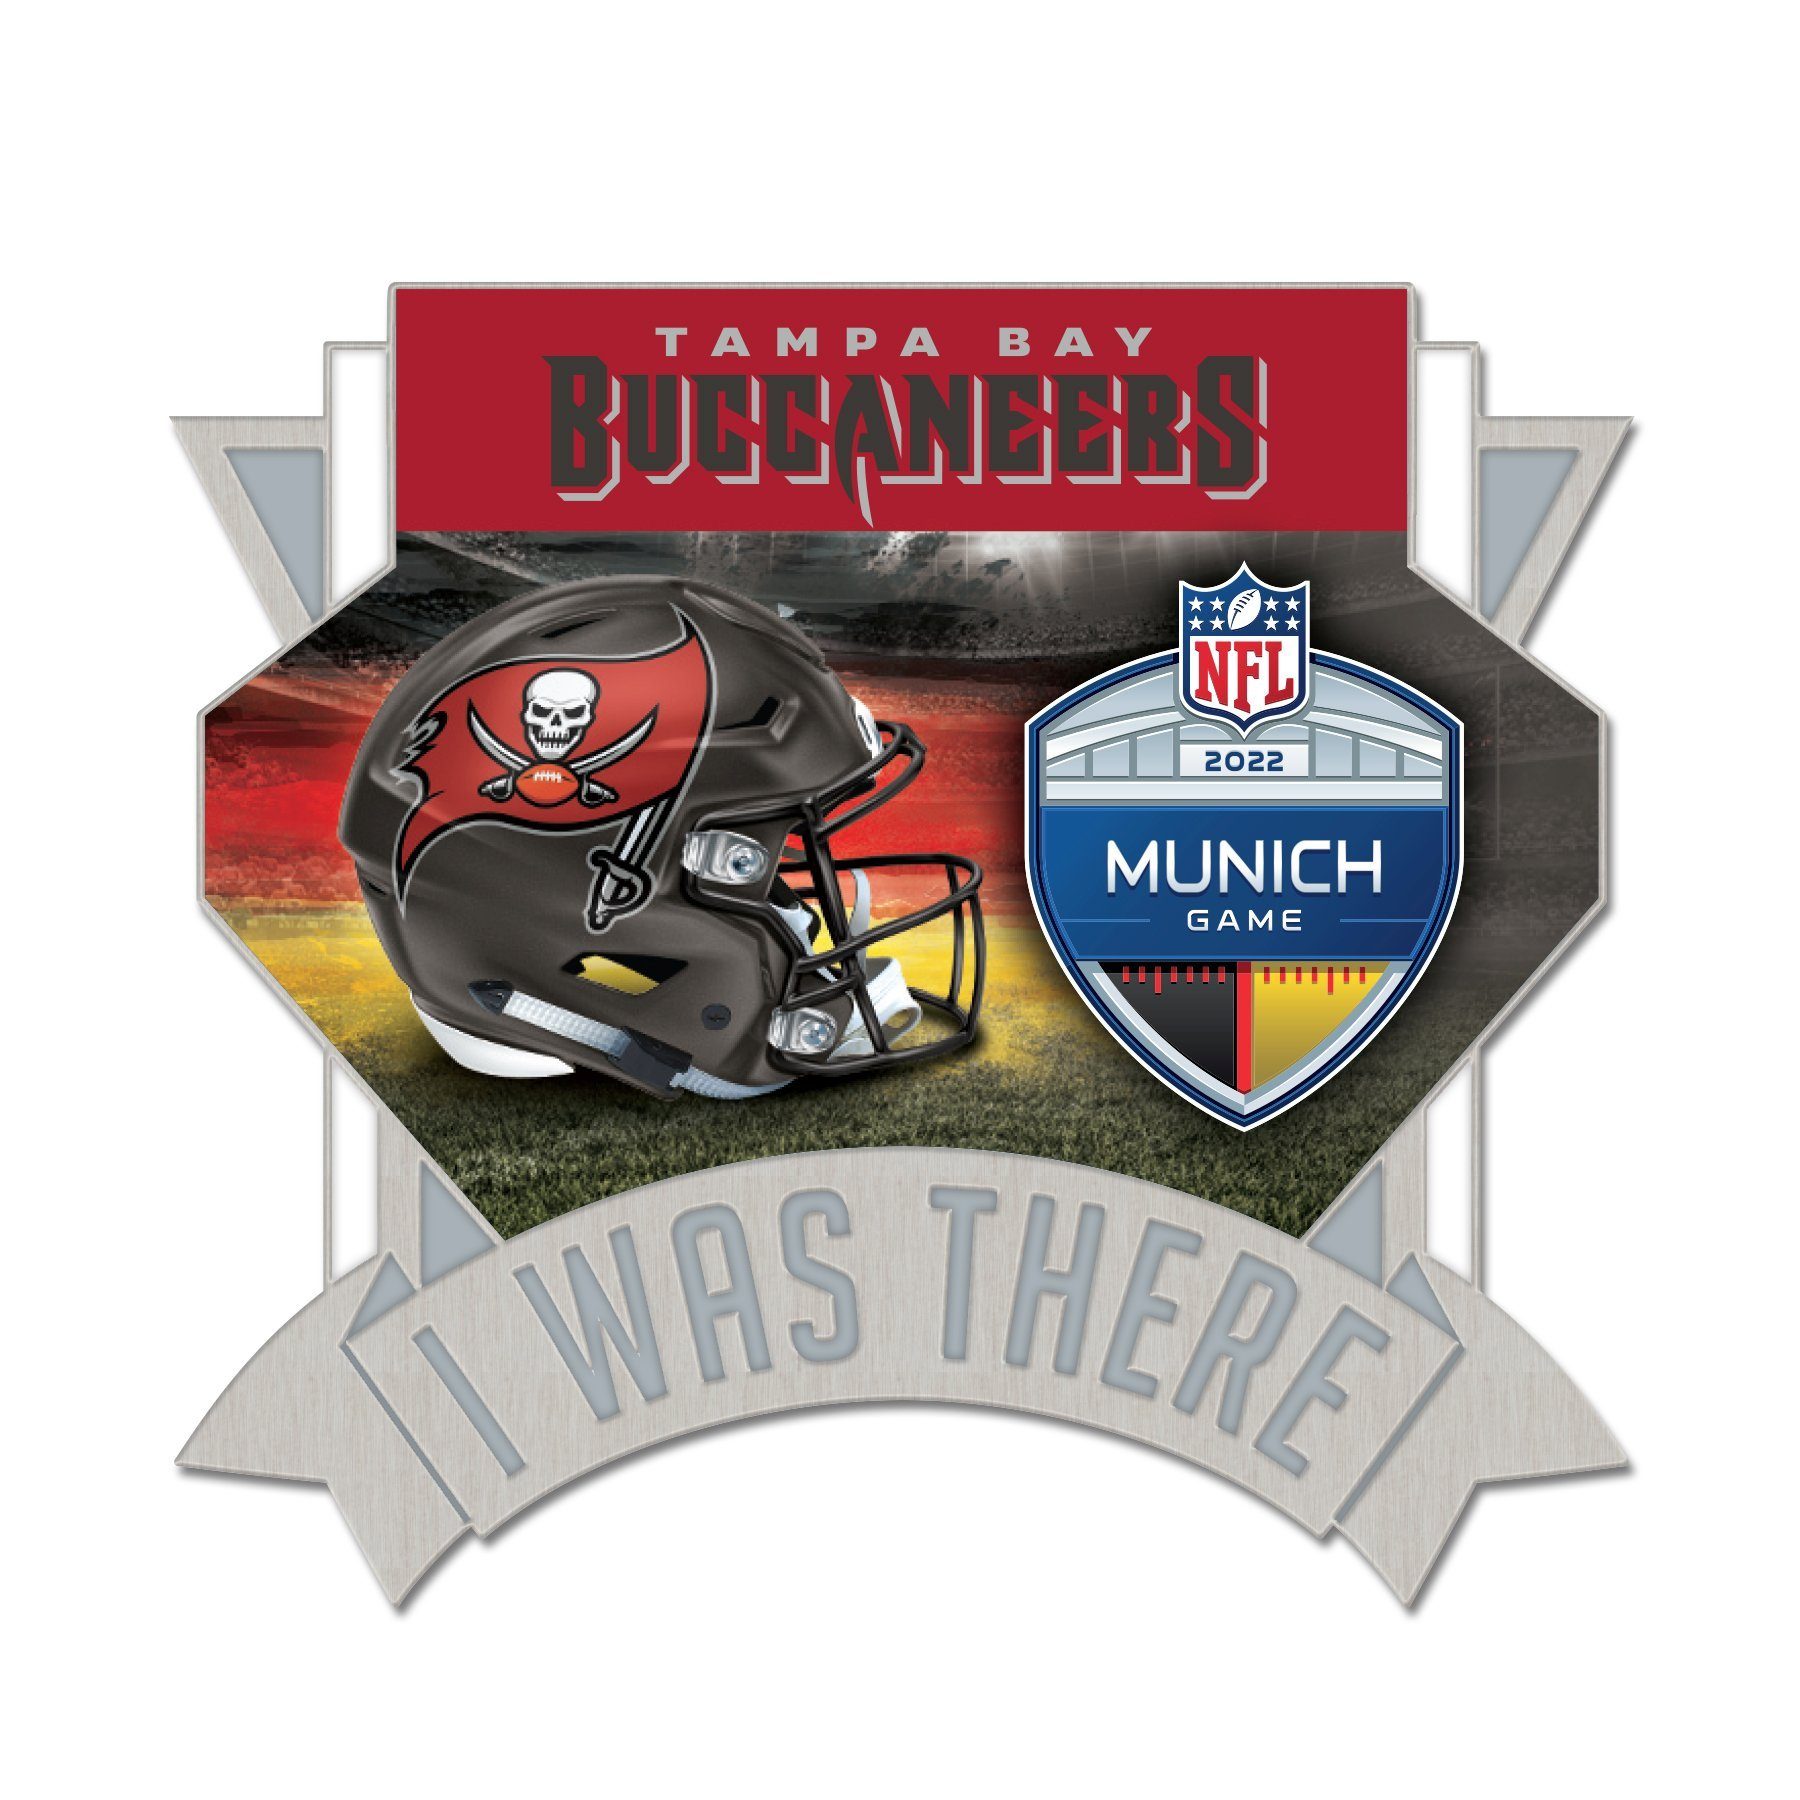 WinCraft Pins NFL Pin Badge NFL I WAS THERE Buccs